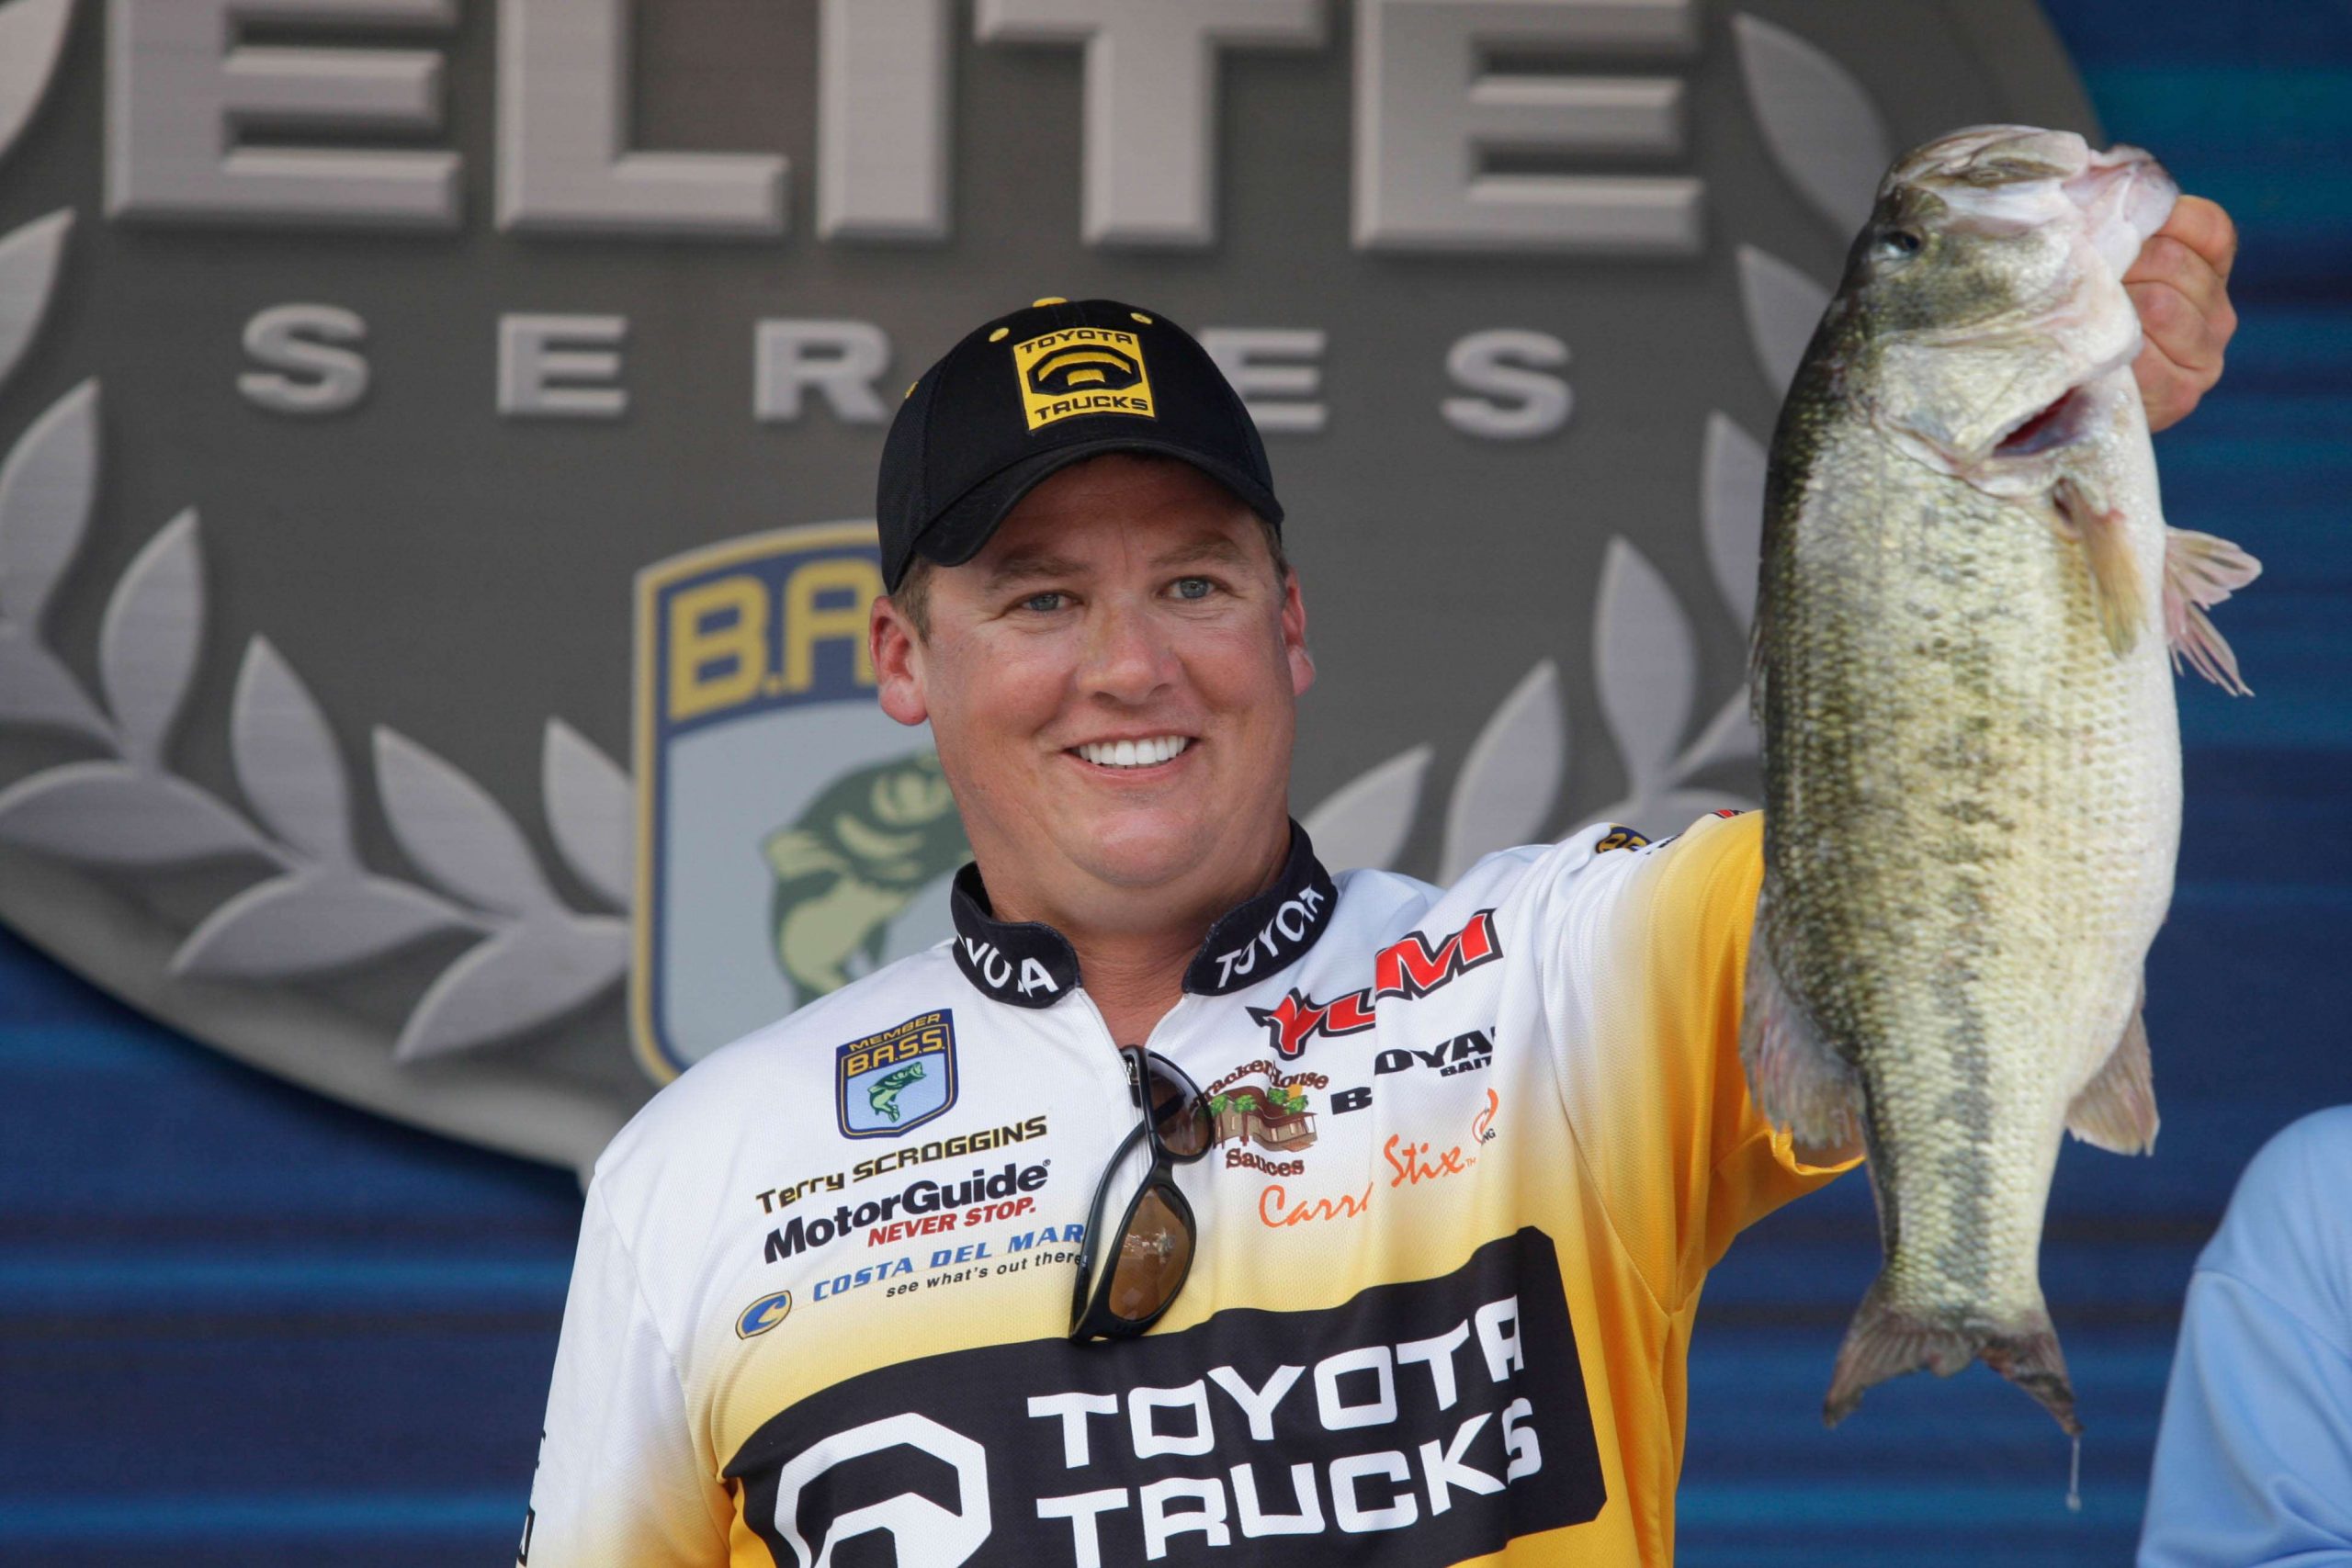 Terry Scroggins caught the biggest fish of Day 3, an 8-2.